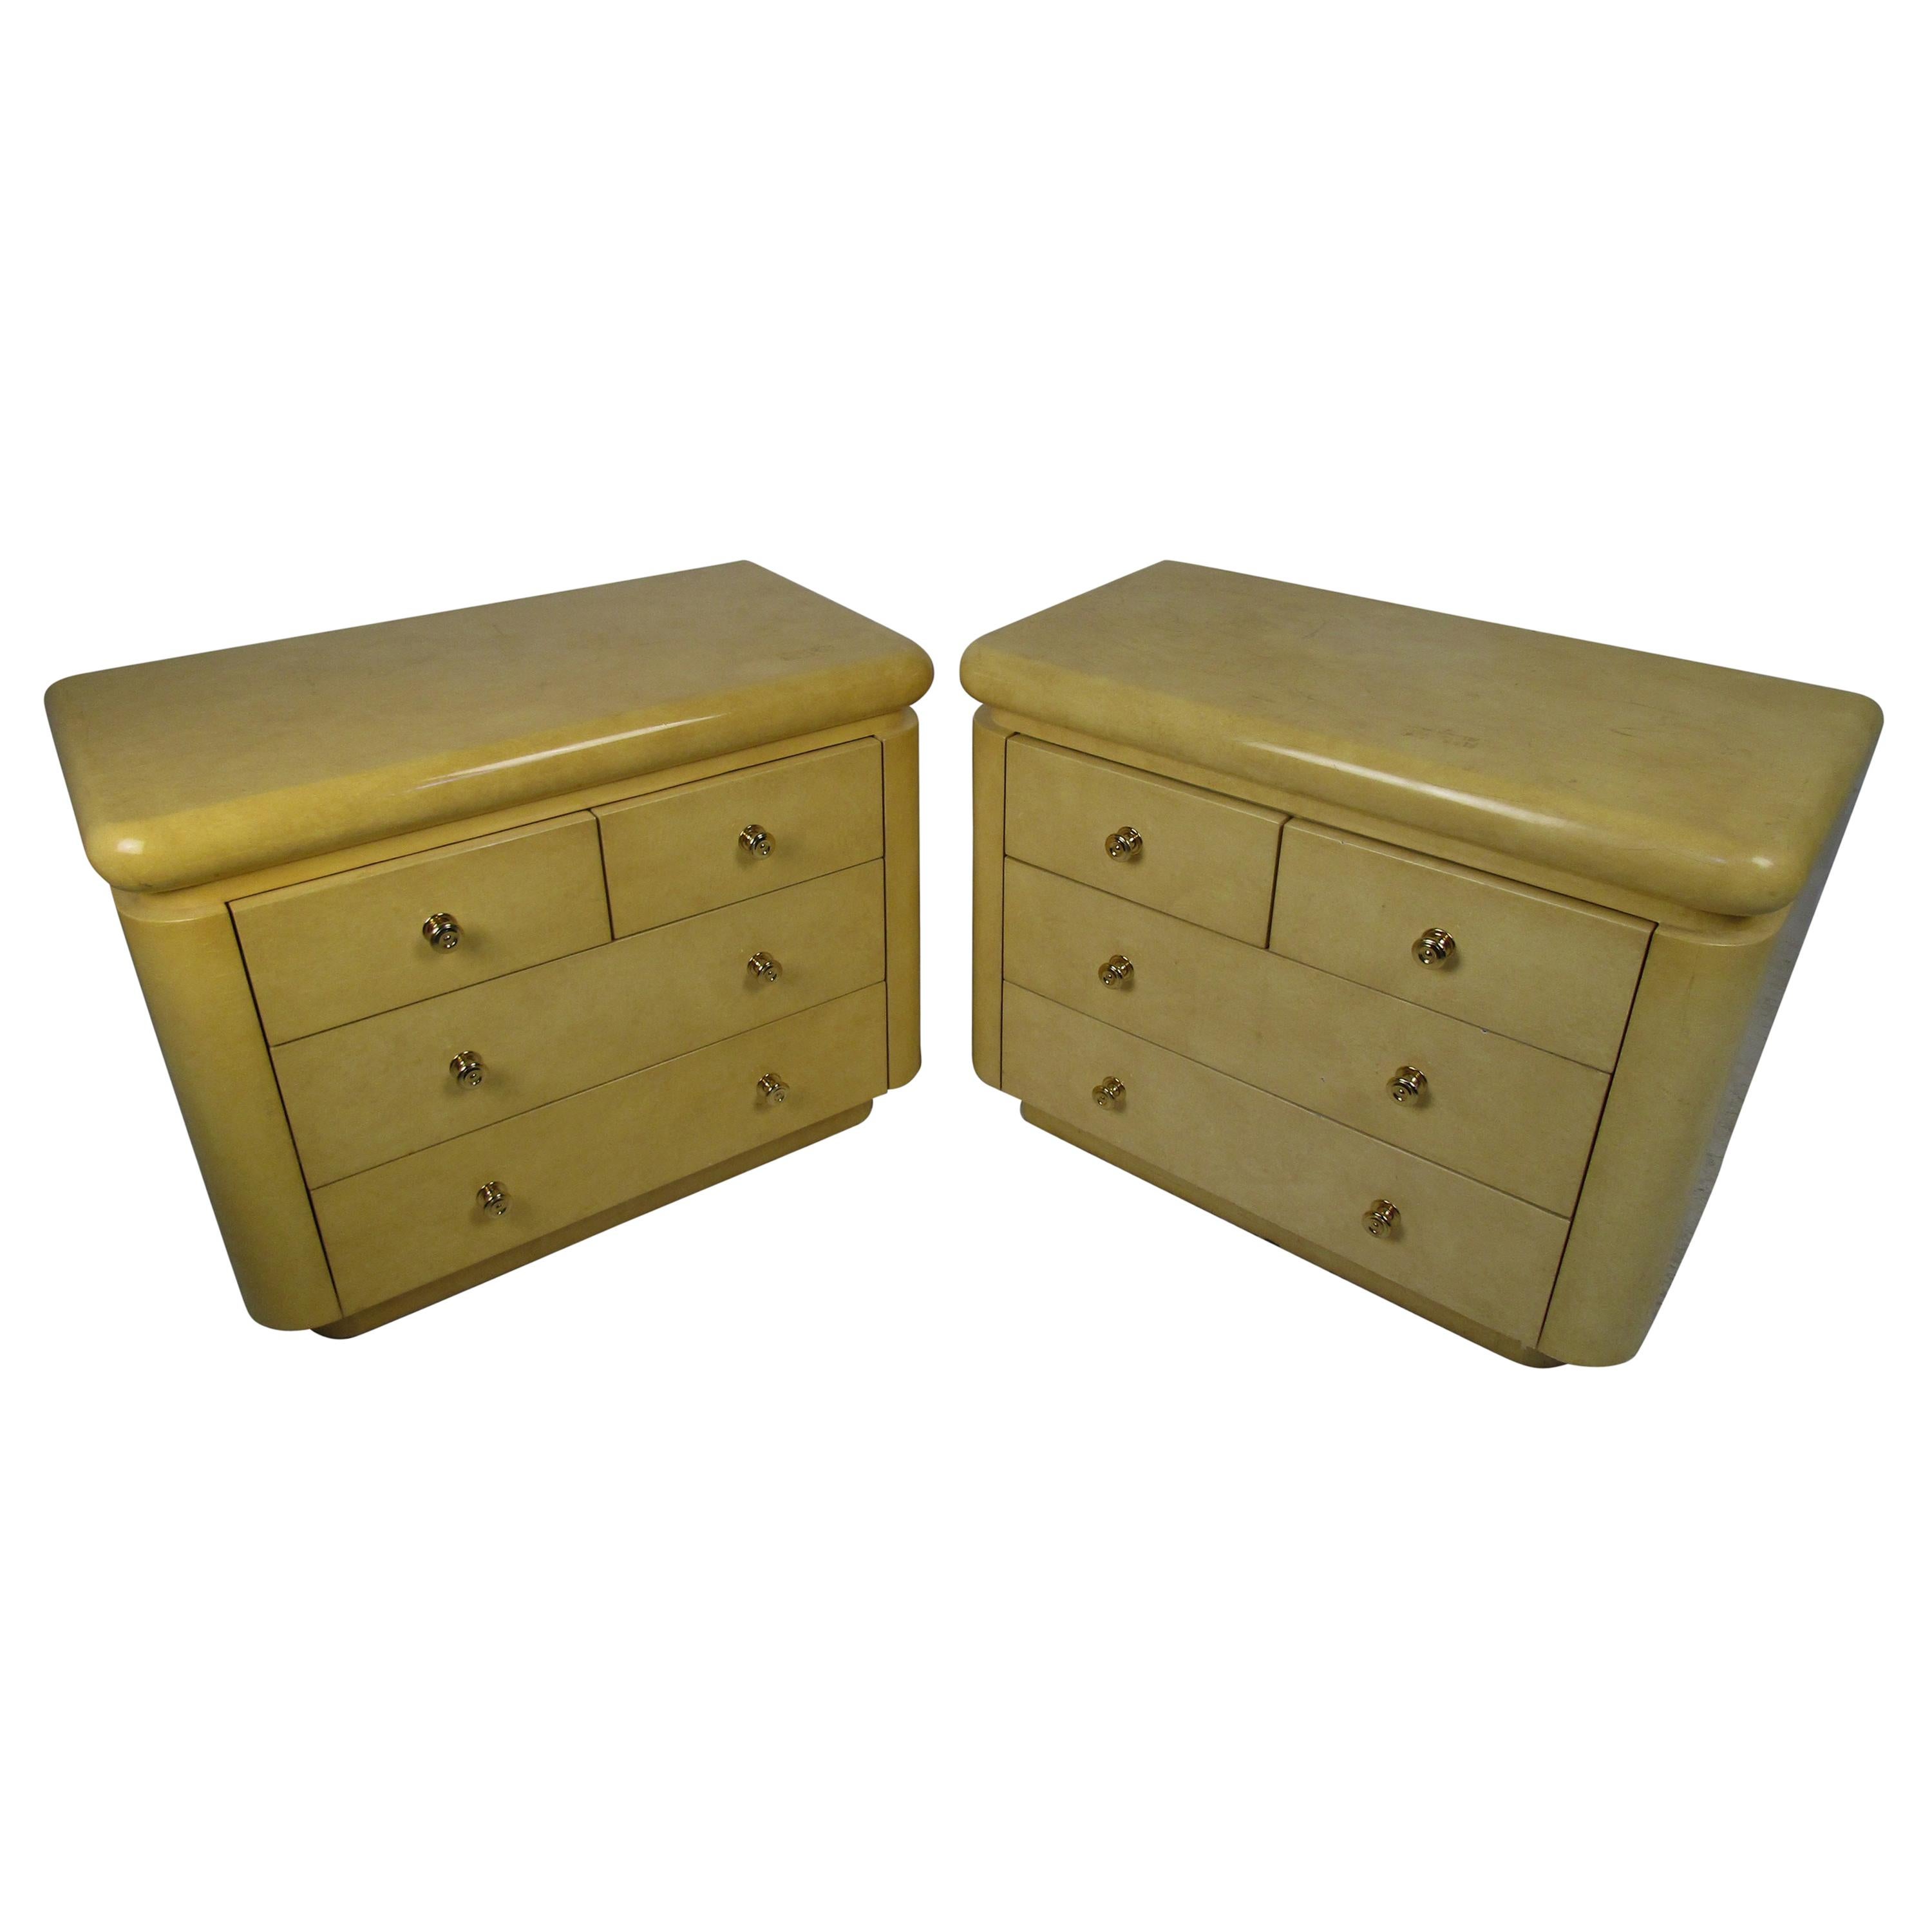 Pair of Mid-Century Modern Karl Springer Style Lacquered Goatskin Chests